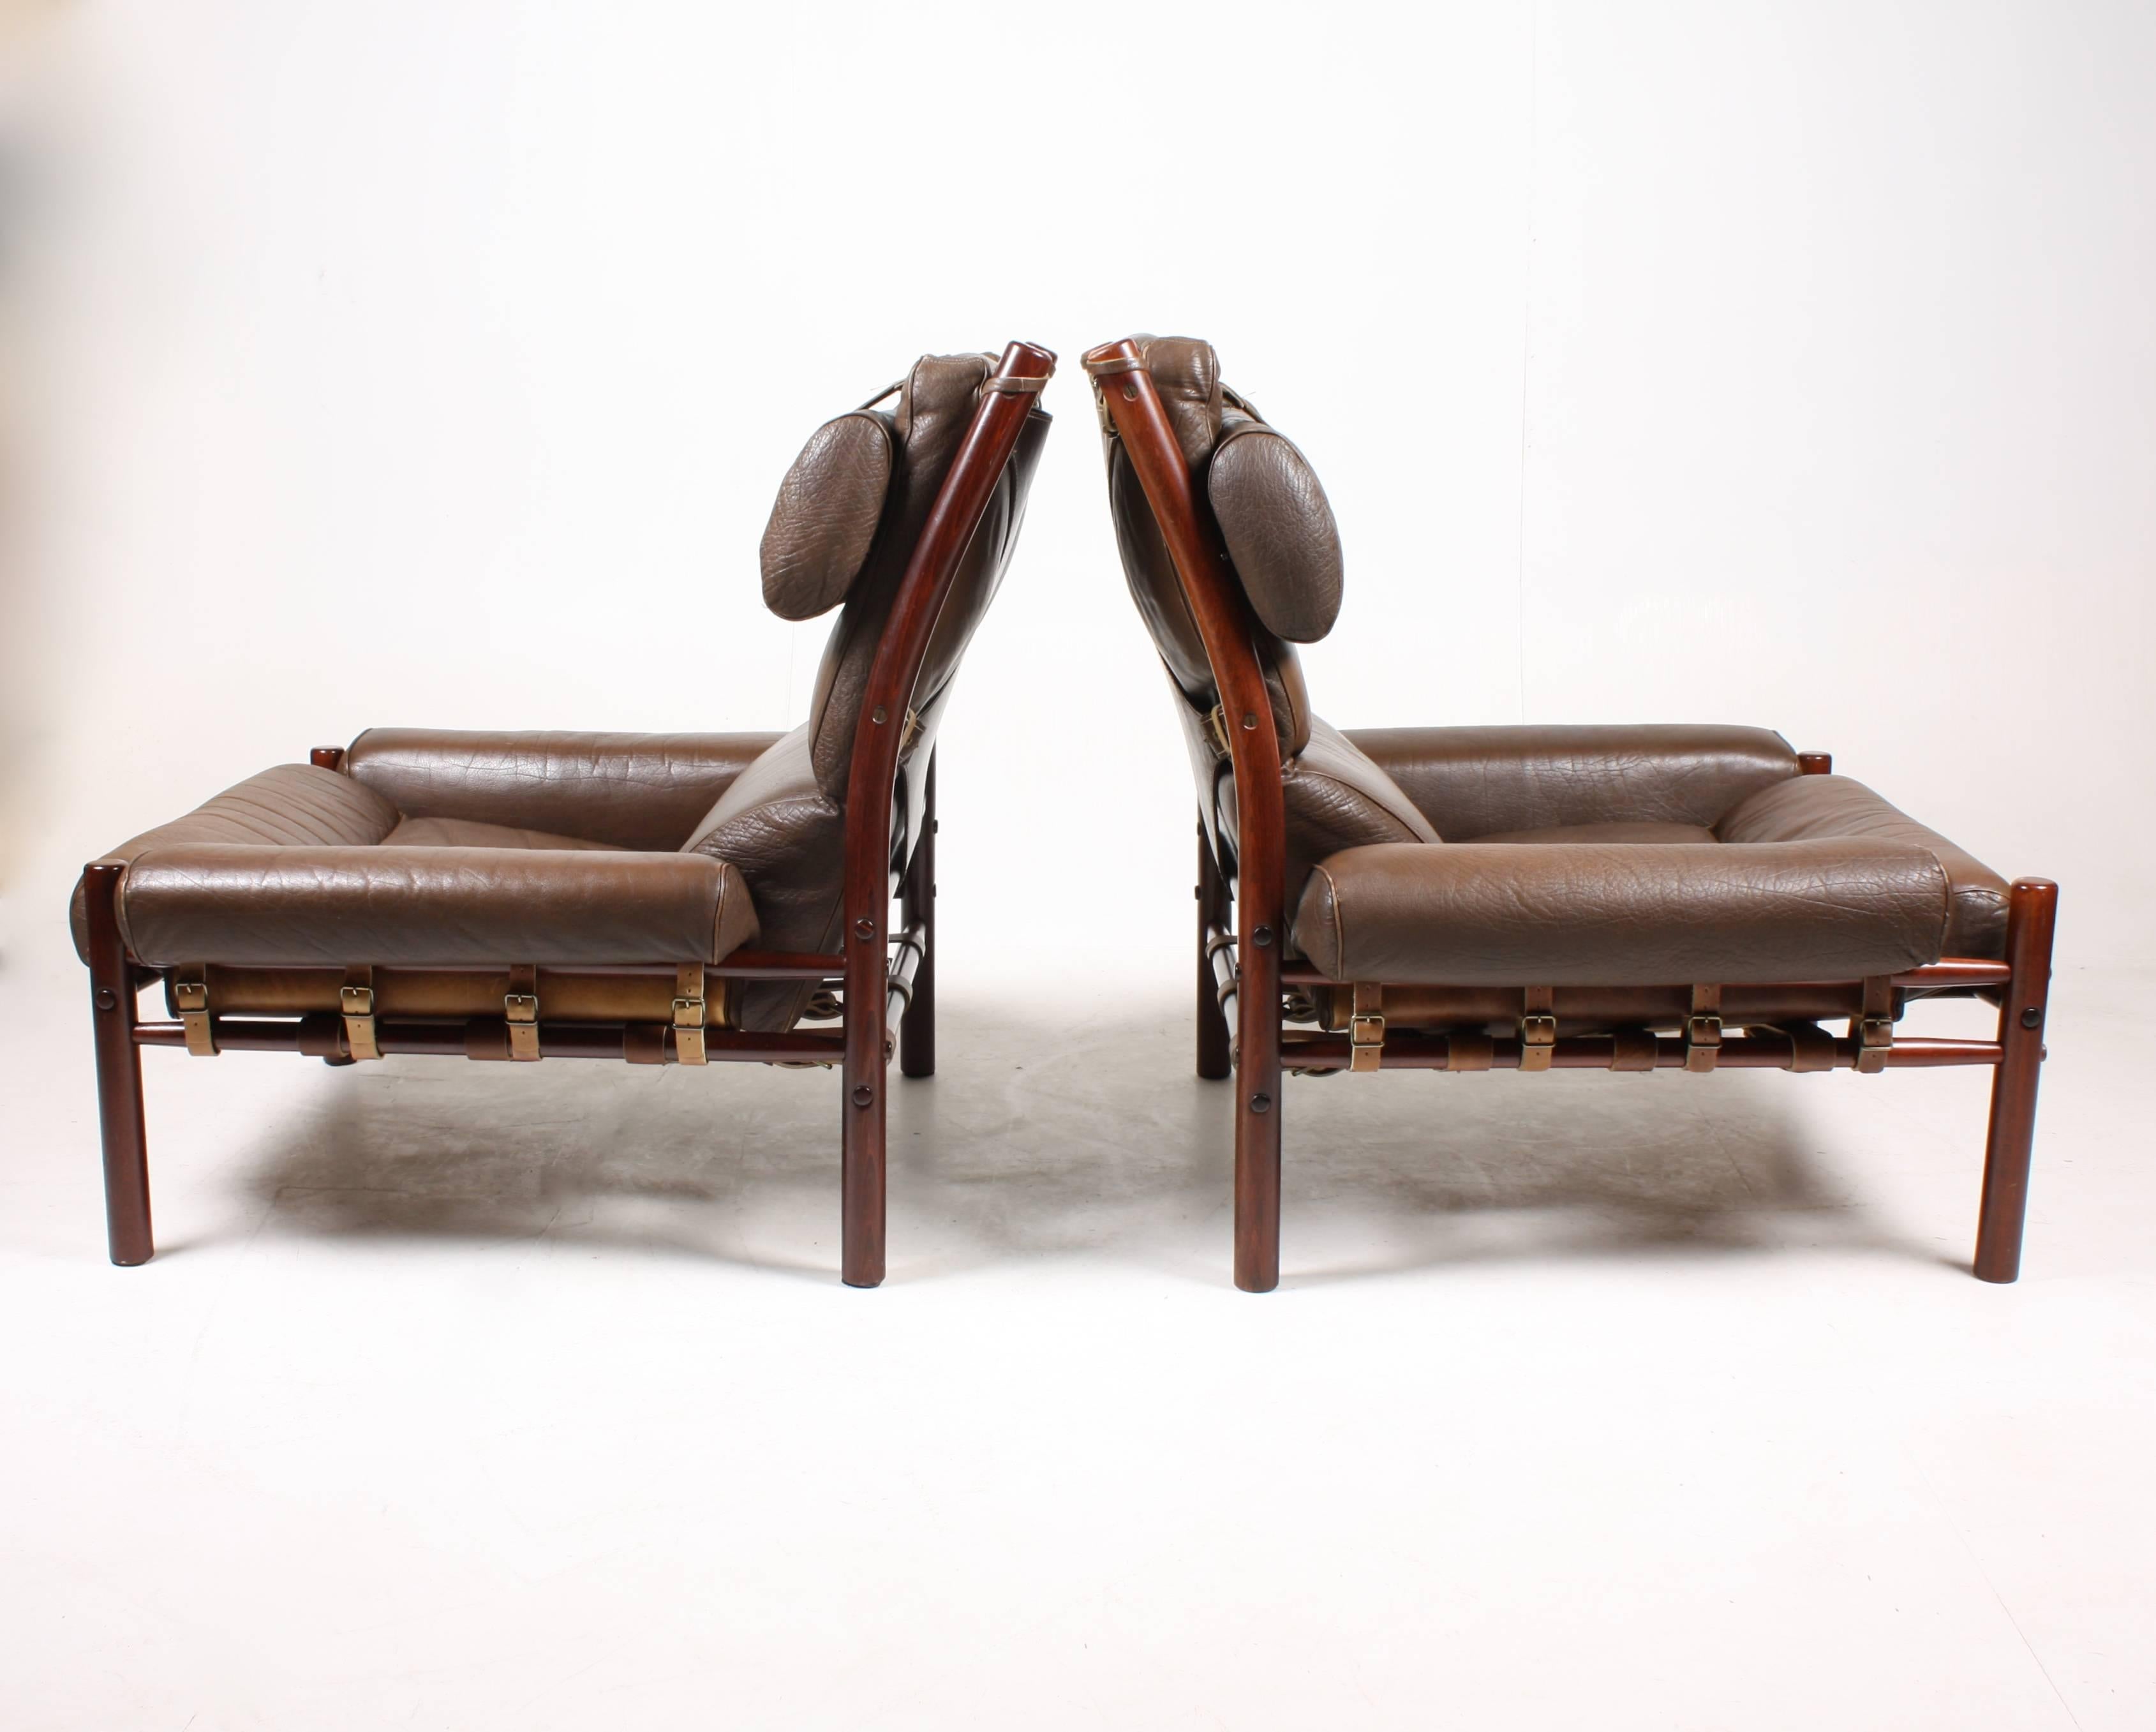 Scandinavian Modern Pair of Inca Lounge Chairs by Norell